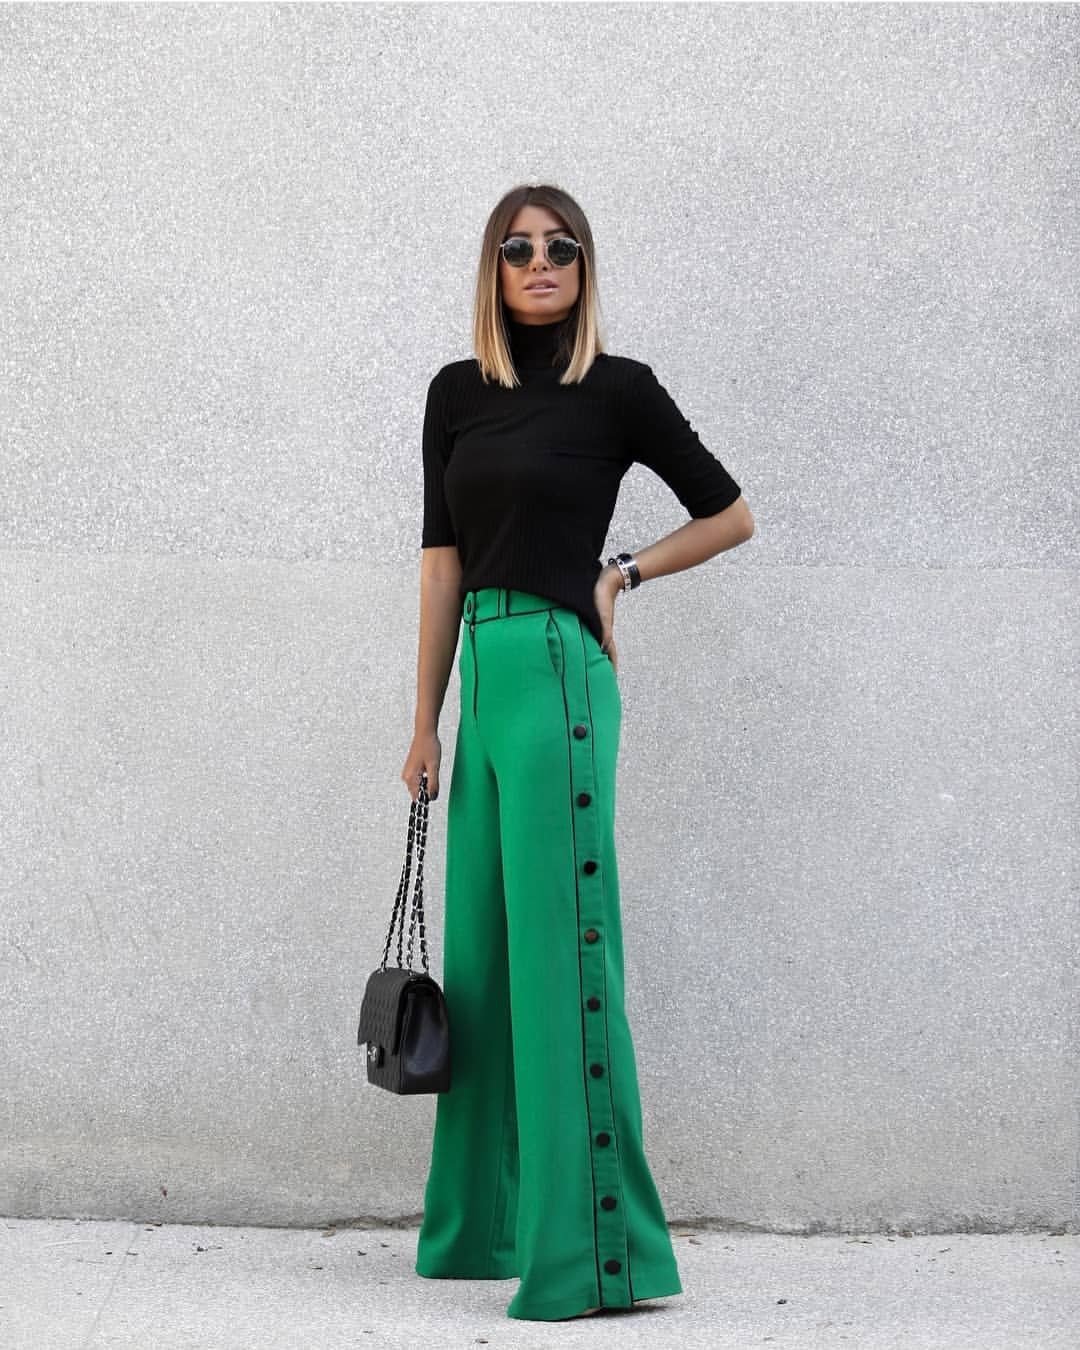 Update 81+ green palazzo pants outfit super hot - in.eteachers